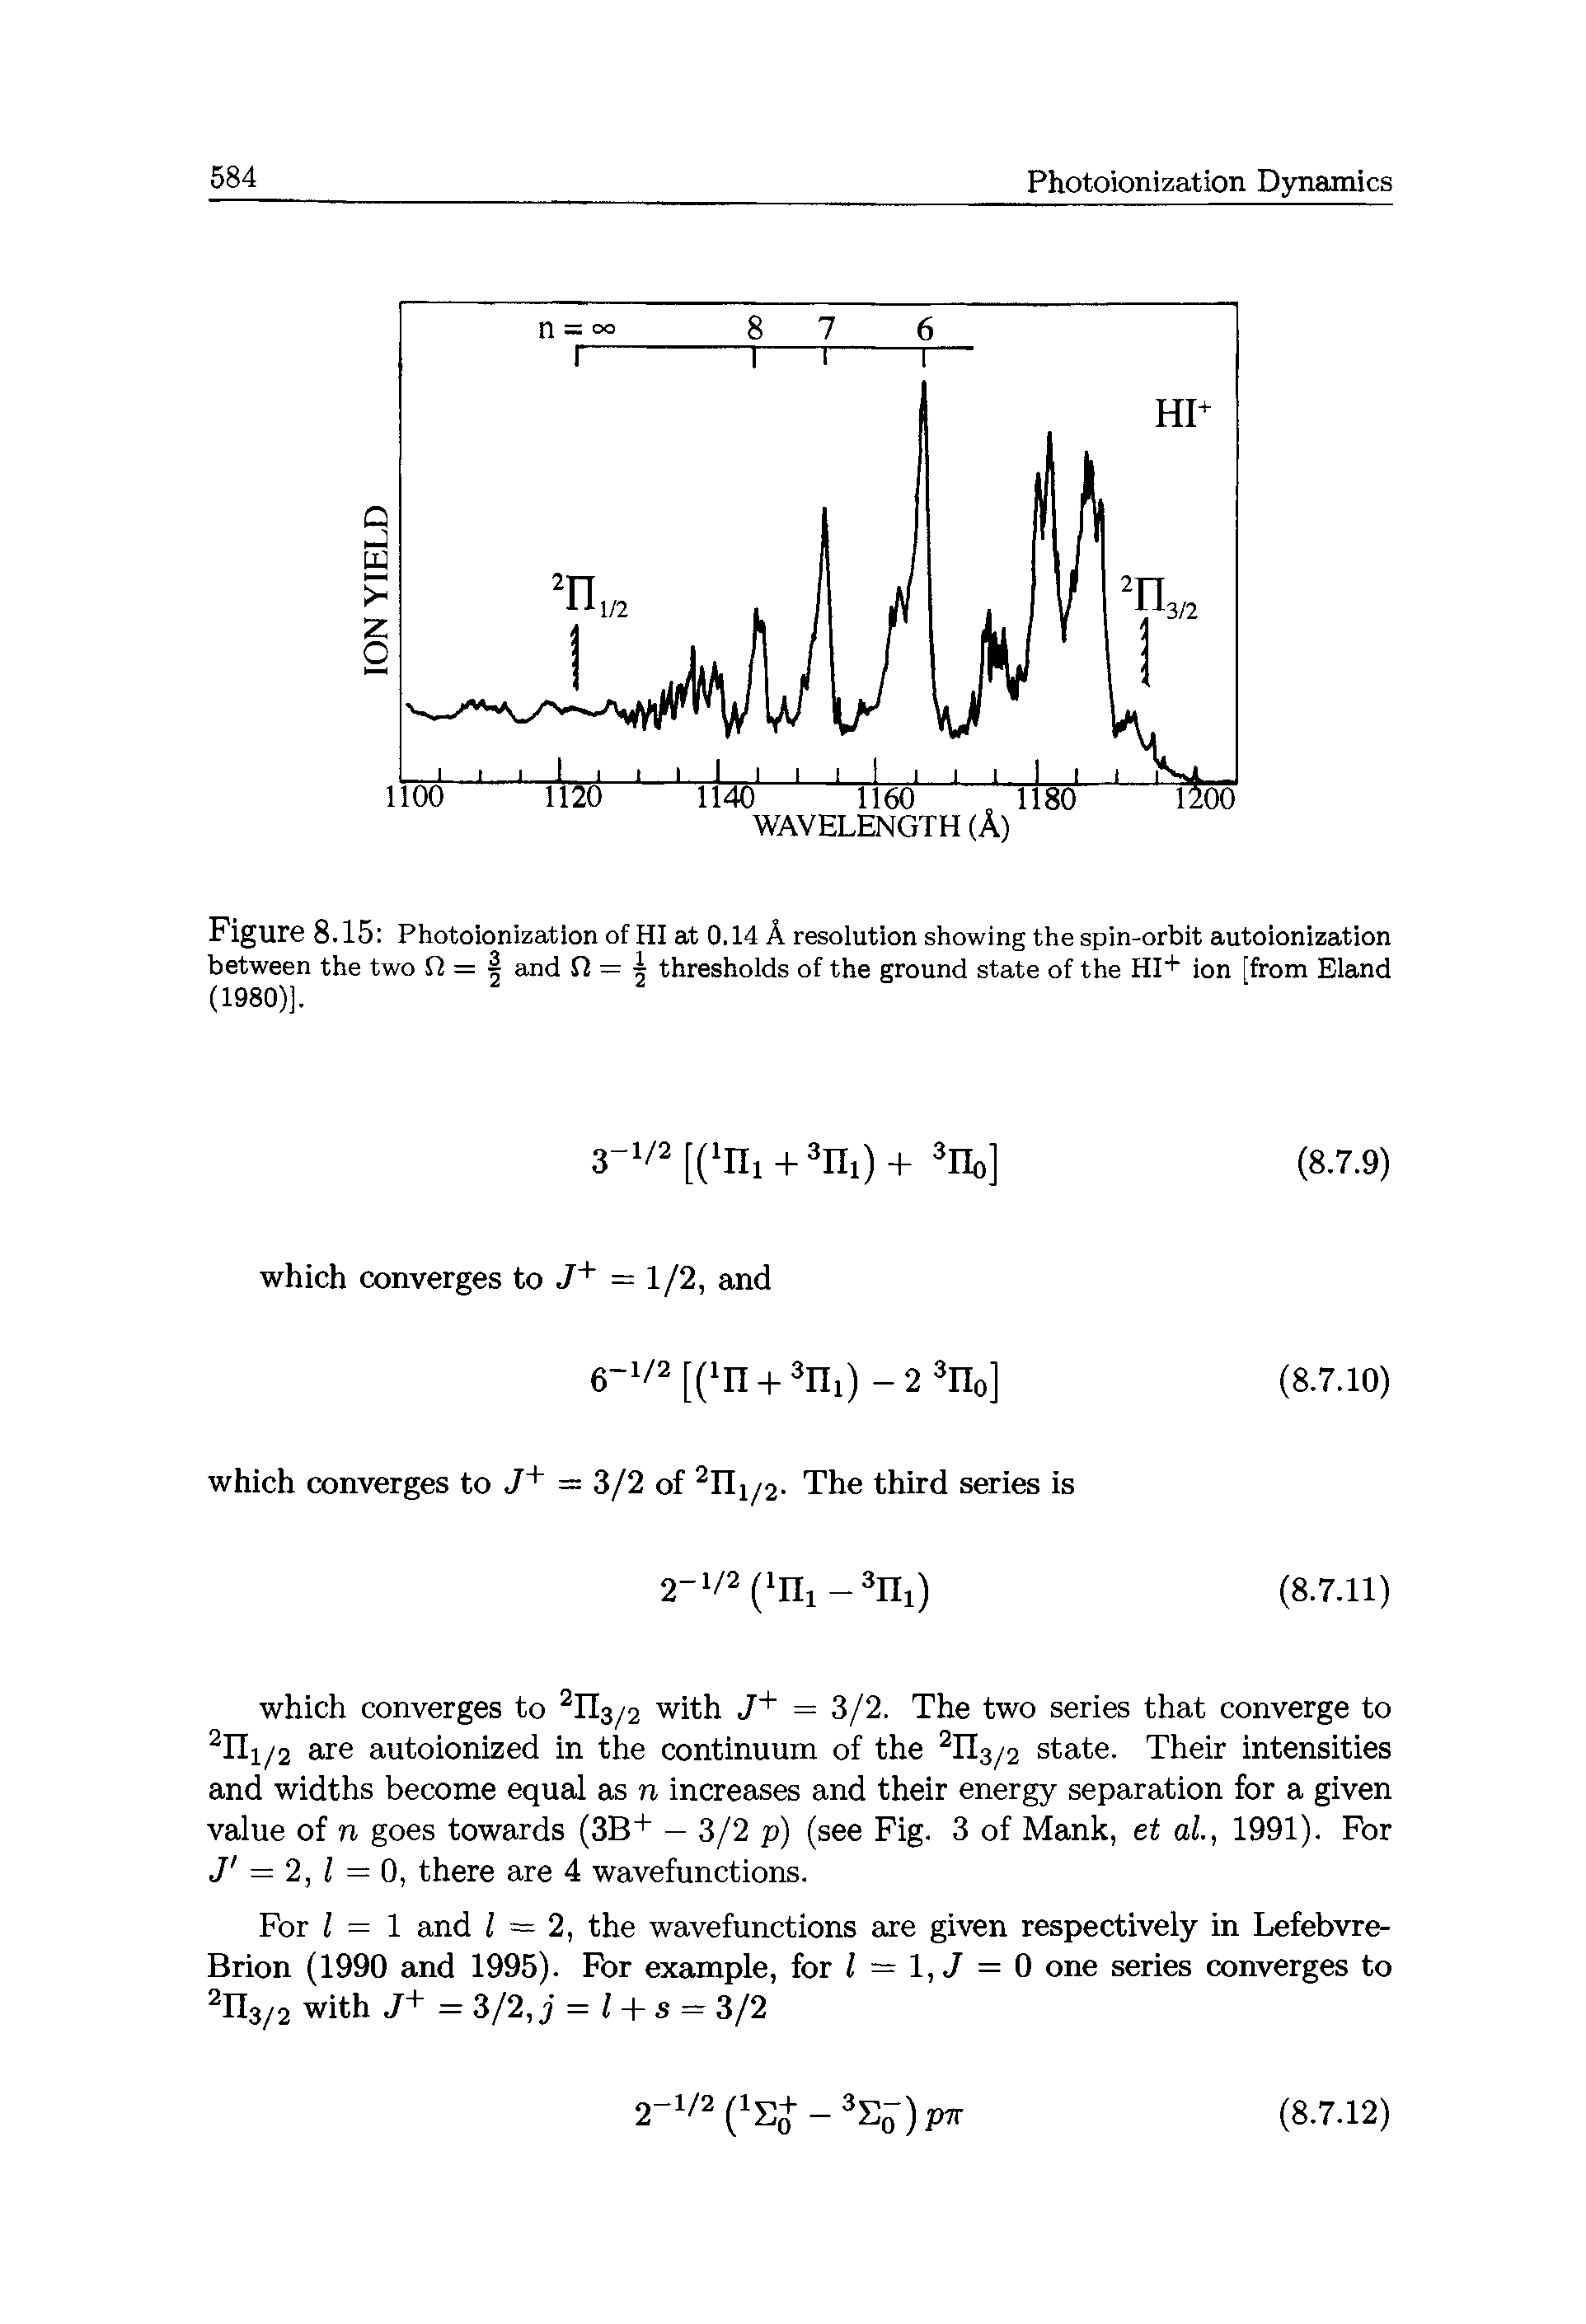 Figure 8.15 Photoionization of HI at 0.14 A resolution showing the spin-orbit autoionization between the two fi = and = 4 thresholds of the ground state of the HI+ ion [from Eland (1980)].